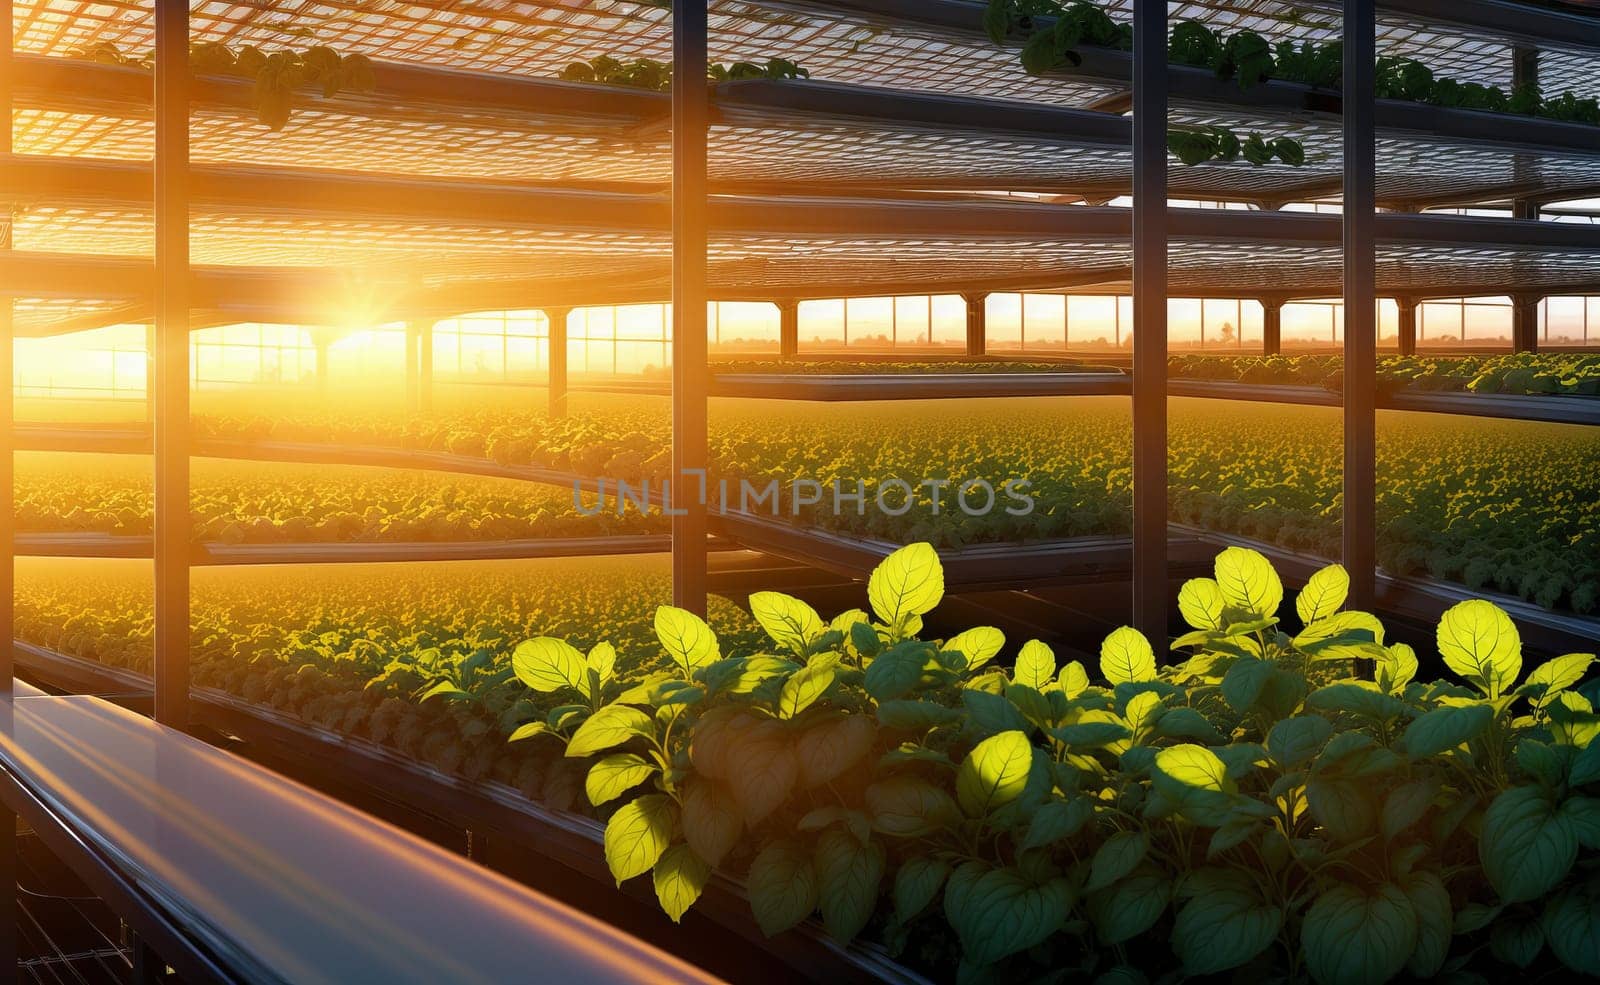 Morning sunlight filters through windows onto lush plants in a greenhouse by DCStudio